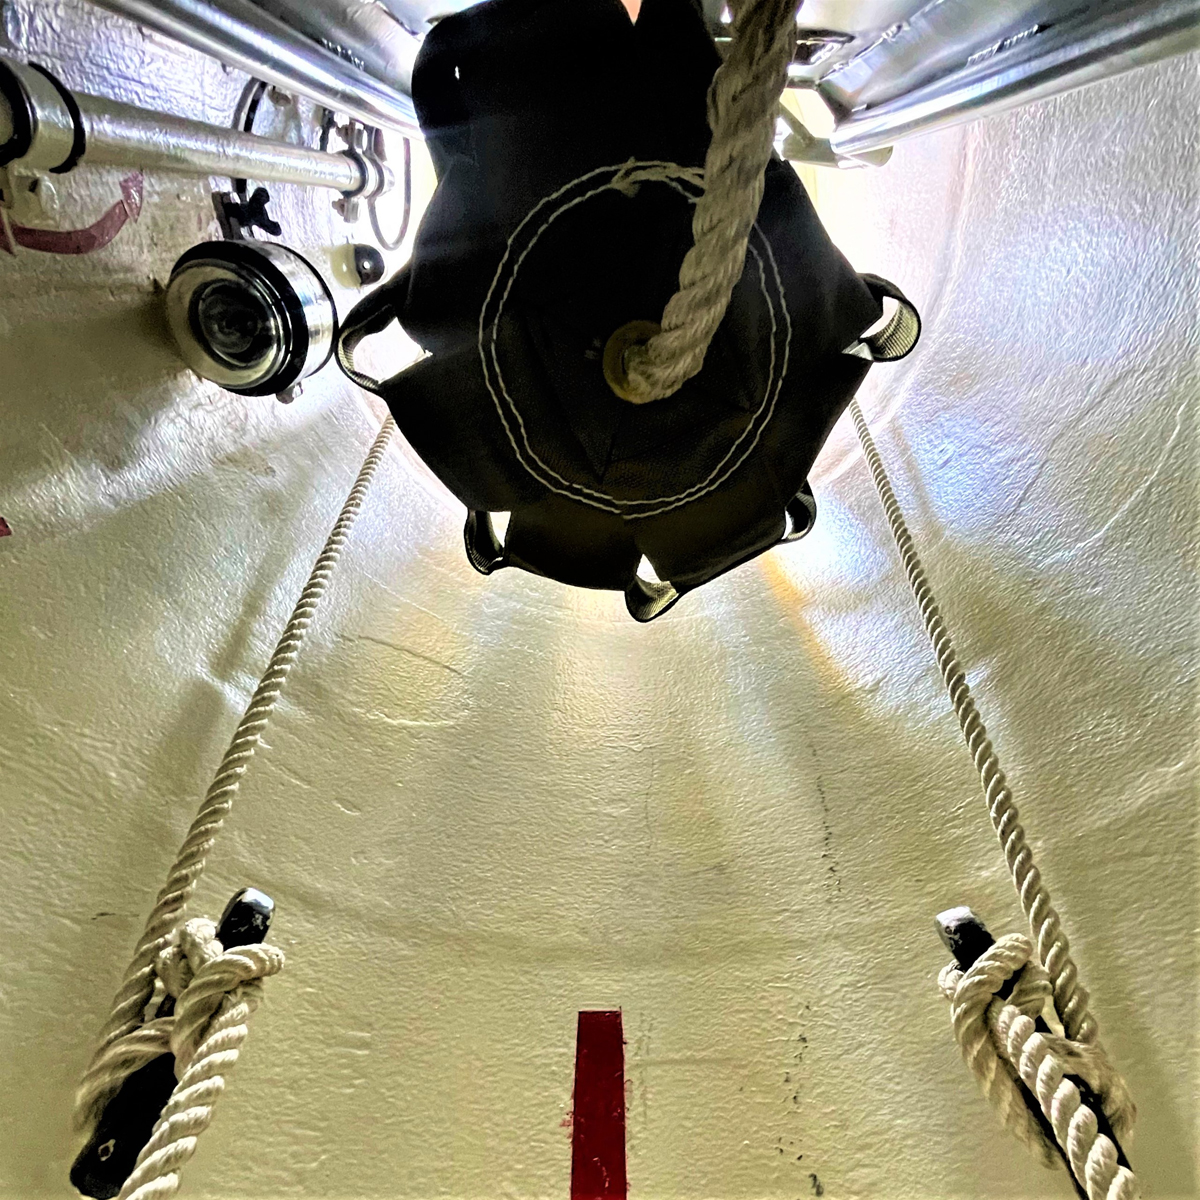 ELSS posting bag rigged in HMCS Chicoutimi’s forward escape tower. 